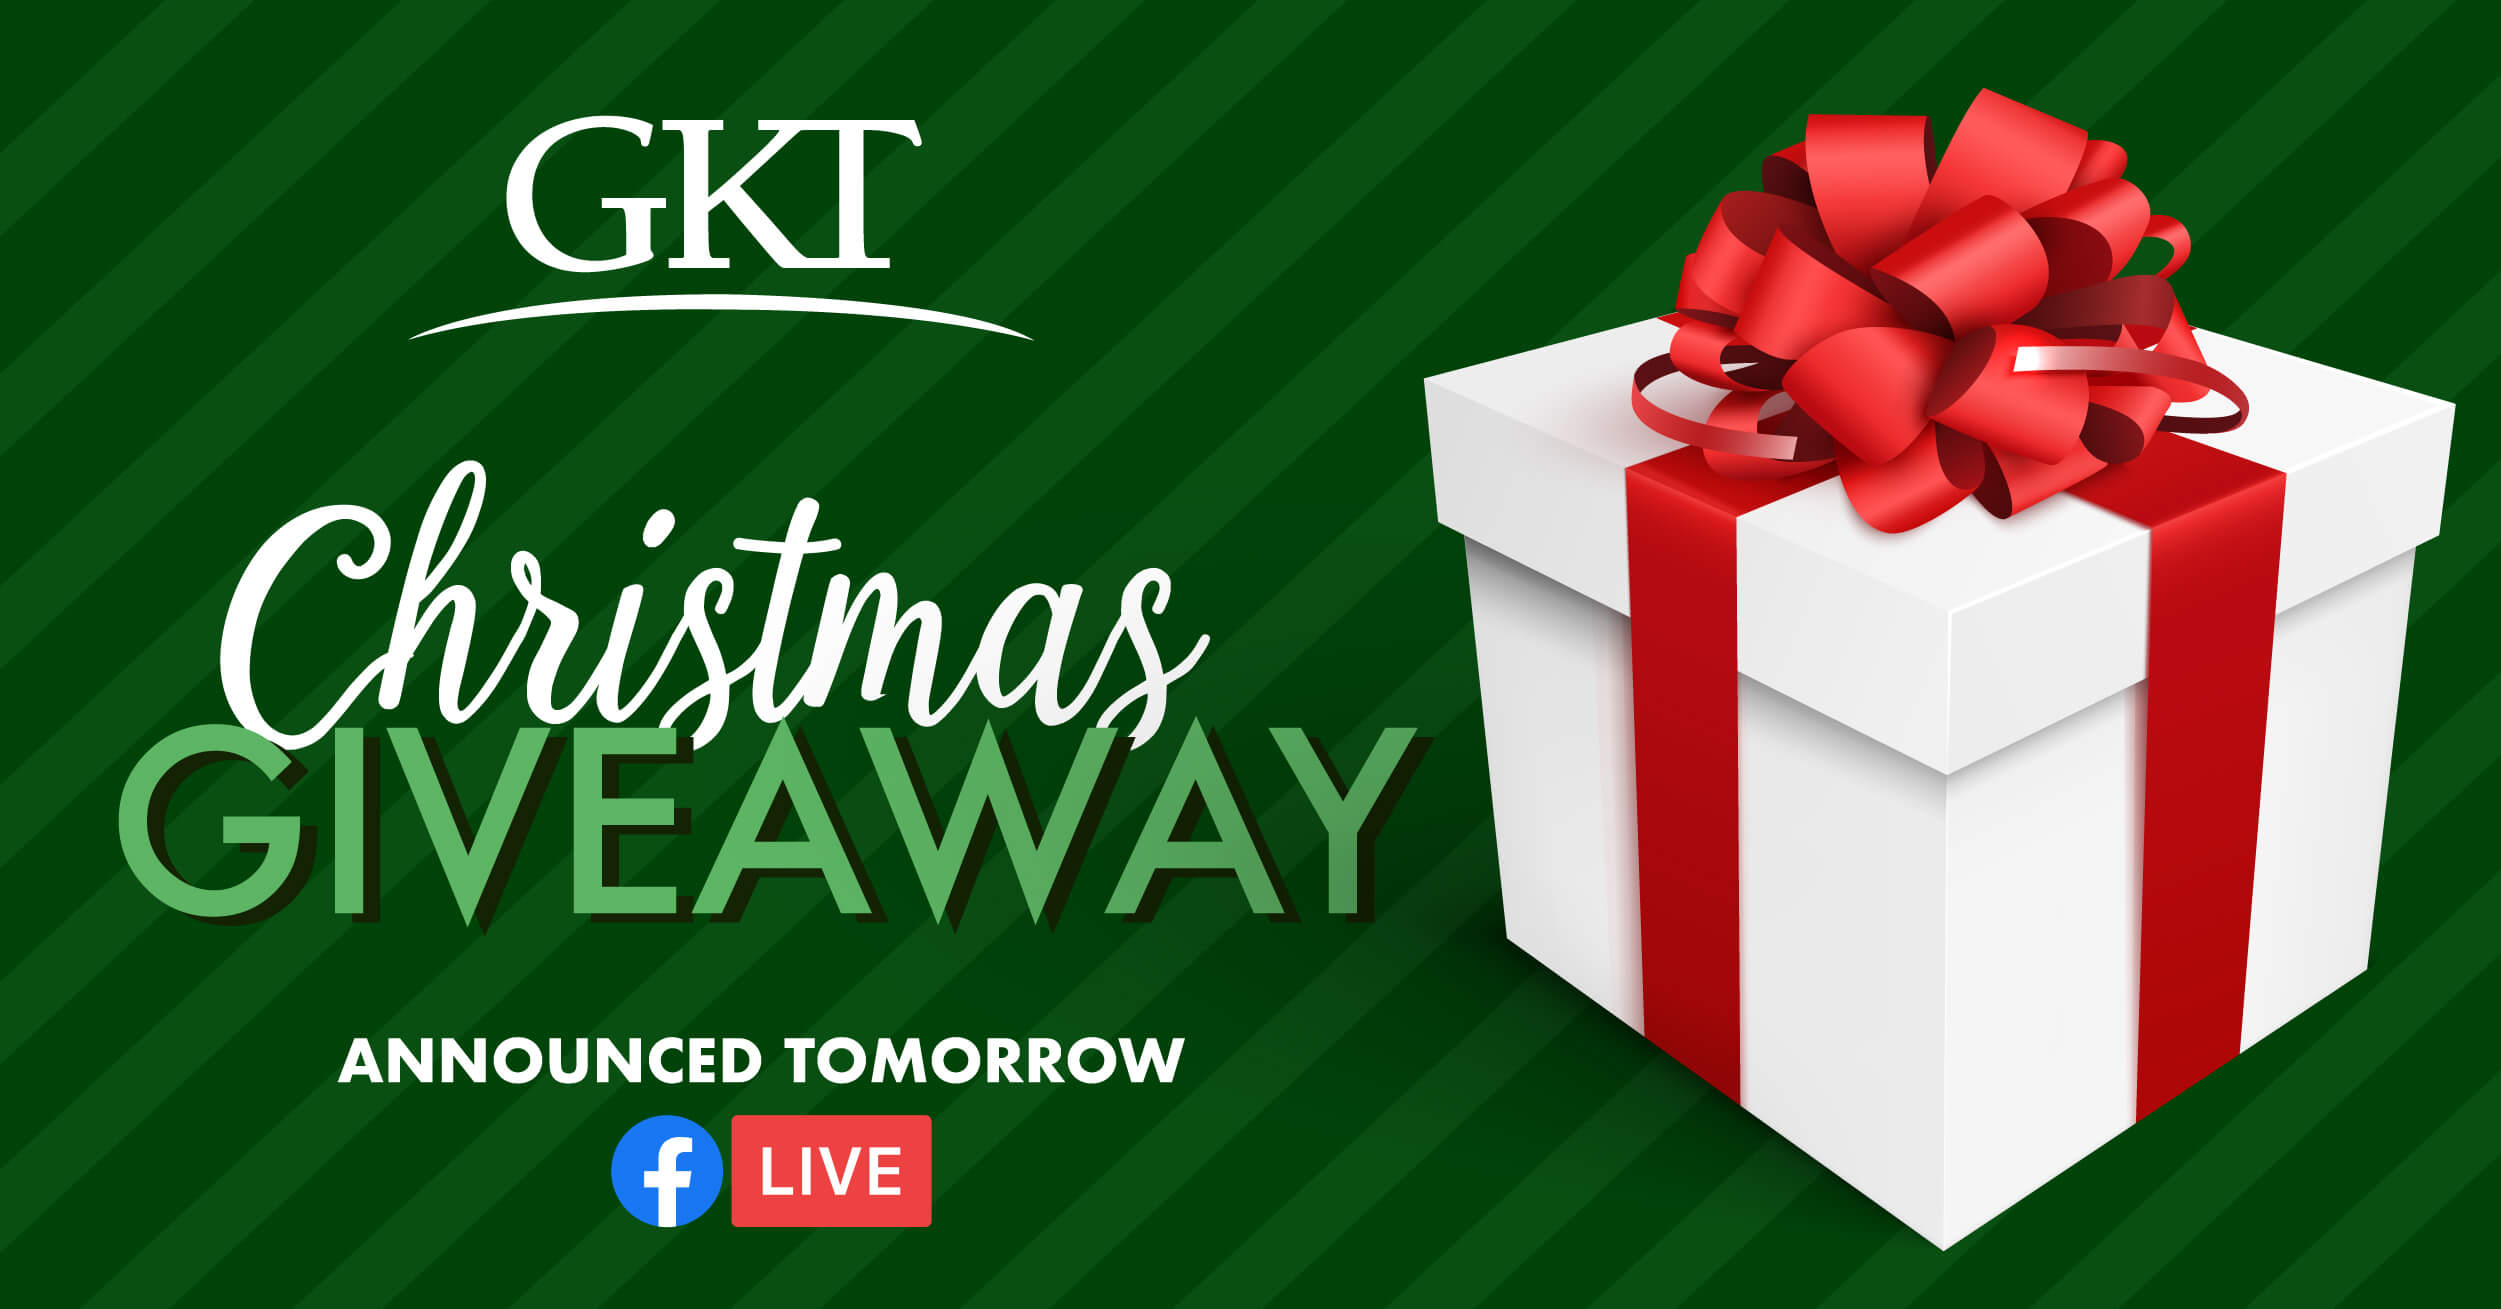 GKT Christmas giveaway